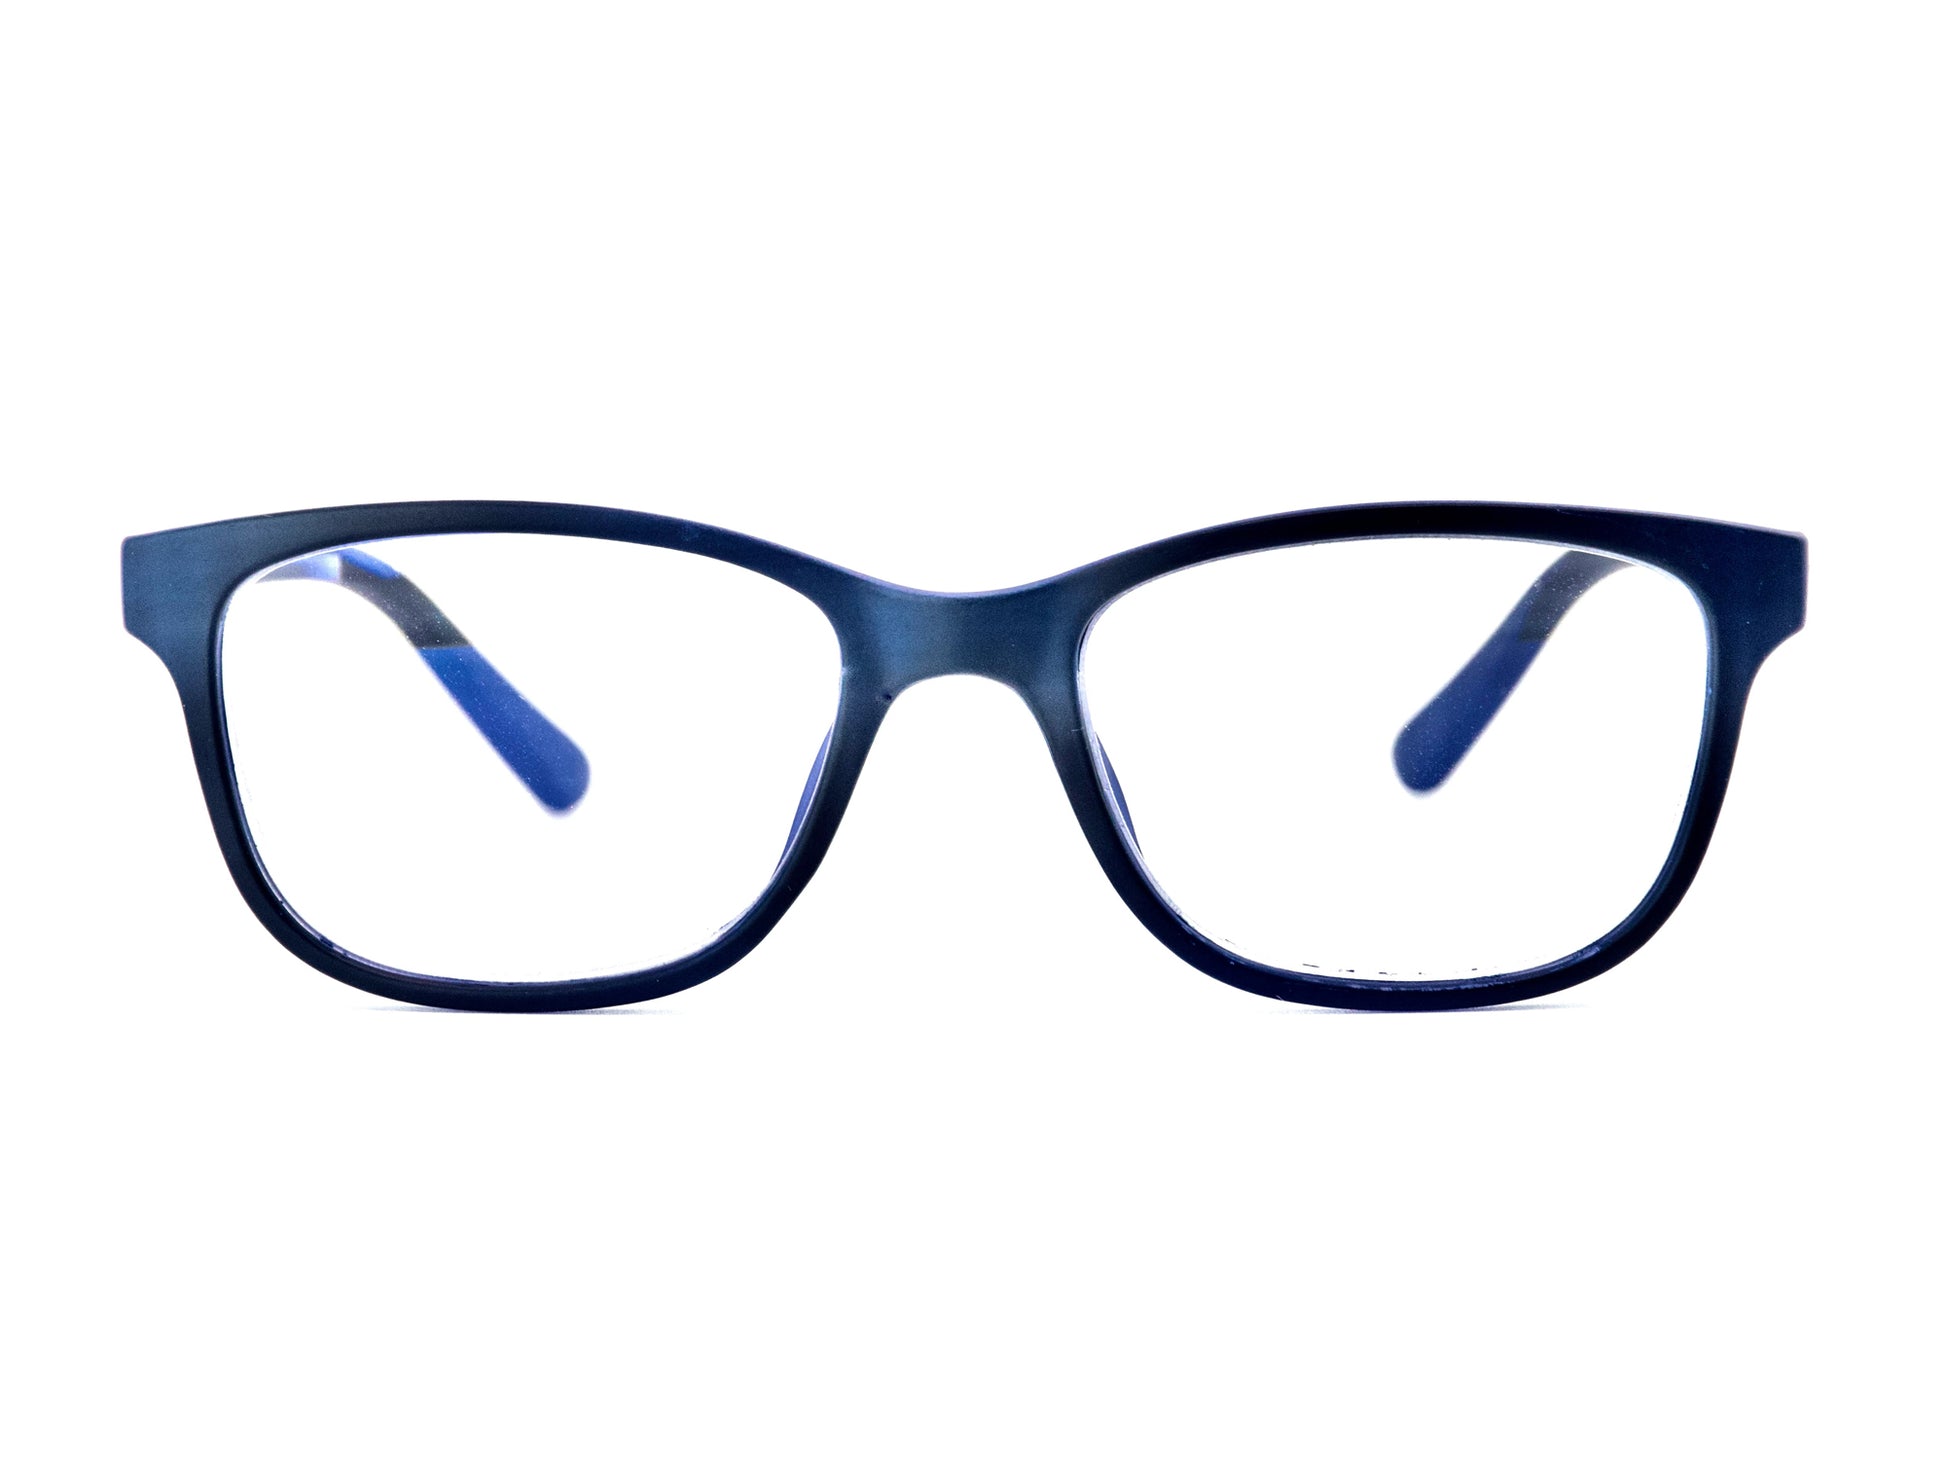 Orlando Kids, children's, cute, fashionable, blue, blue light blocking glasses with protective frames.